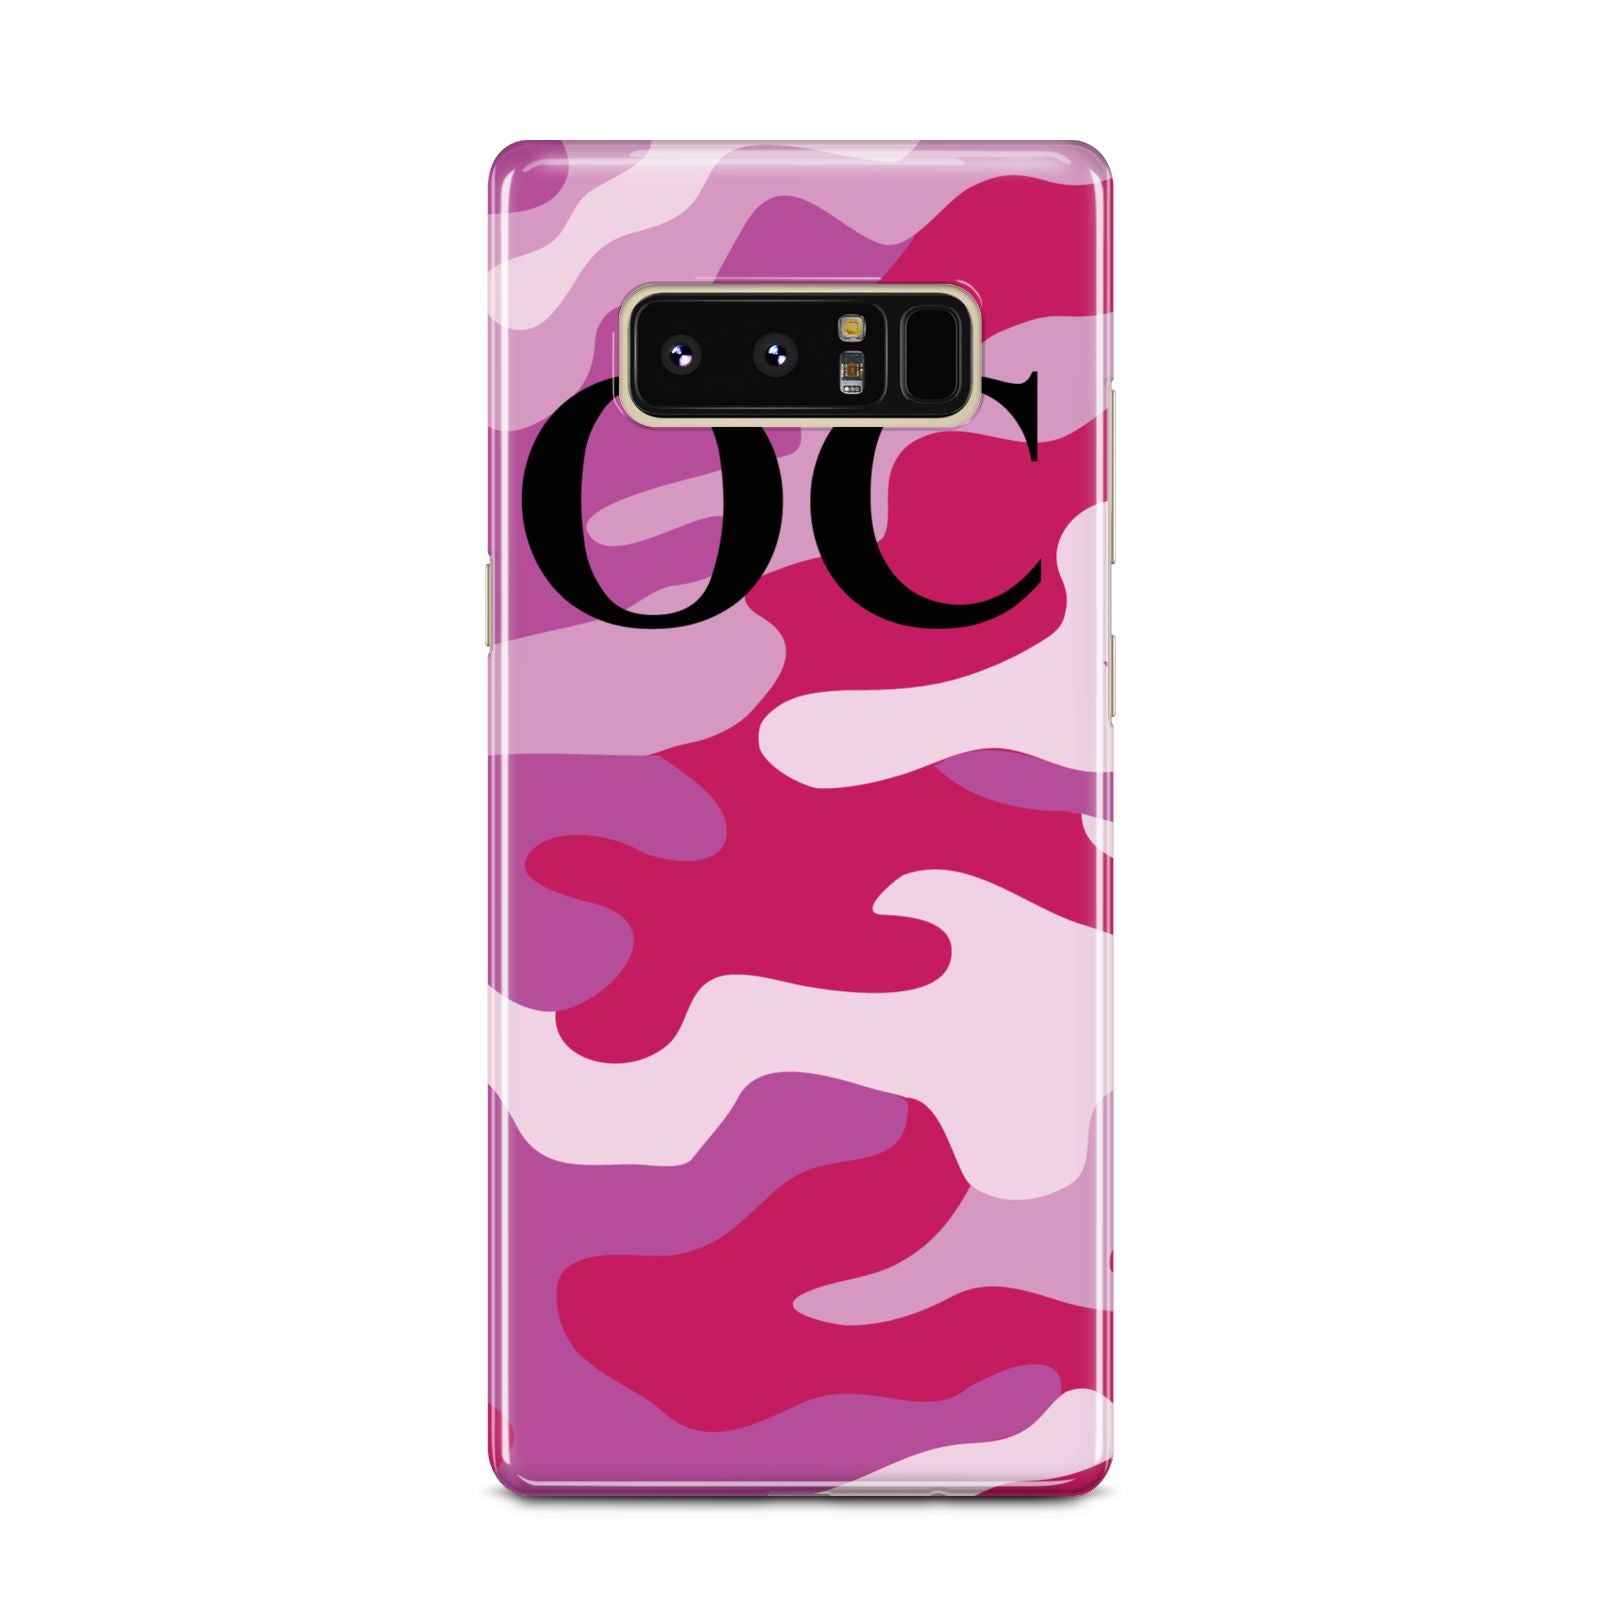 Camouflage Personalised Samsung Galaxy Note 8 Case